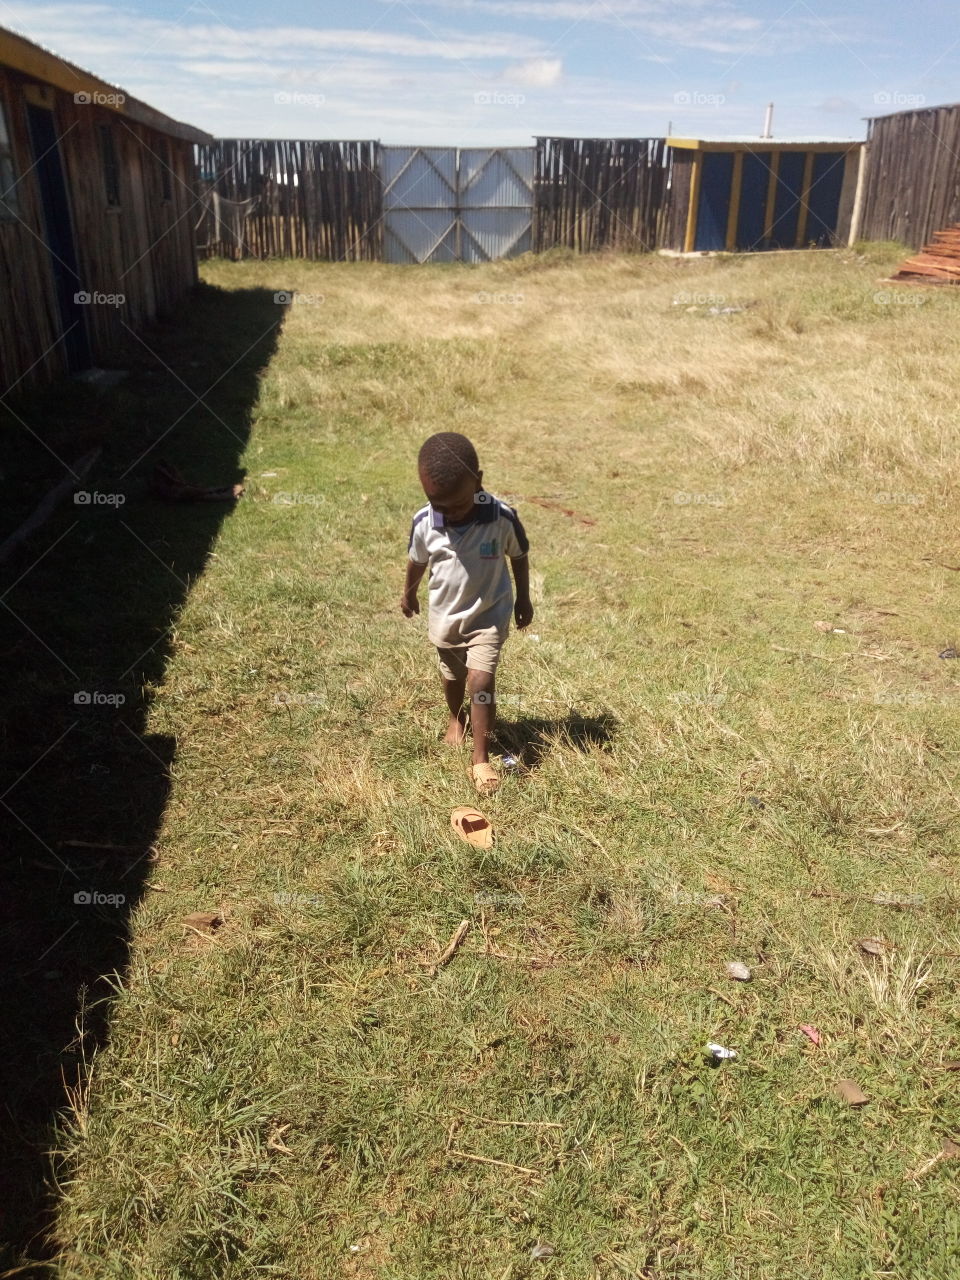 a kid walking alone inside a home compound.